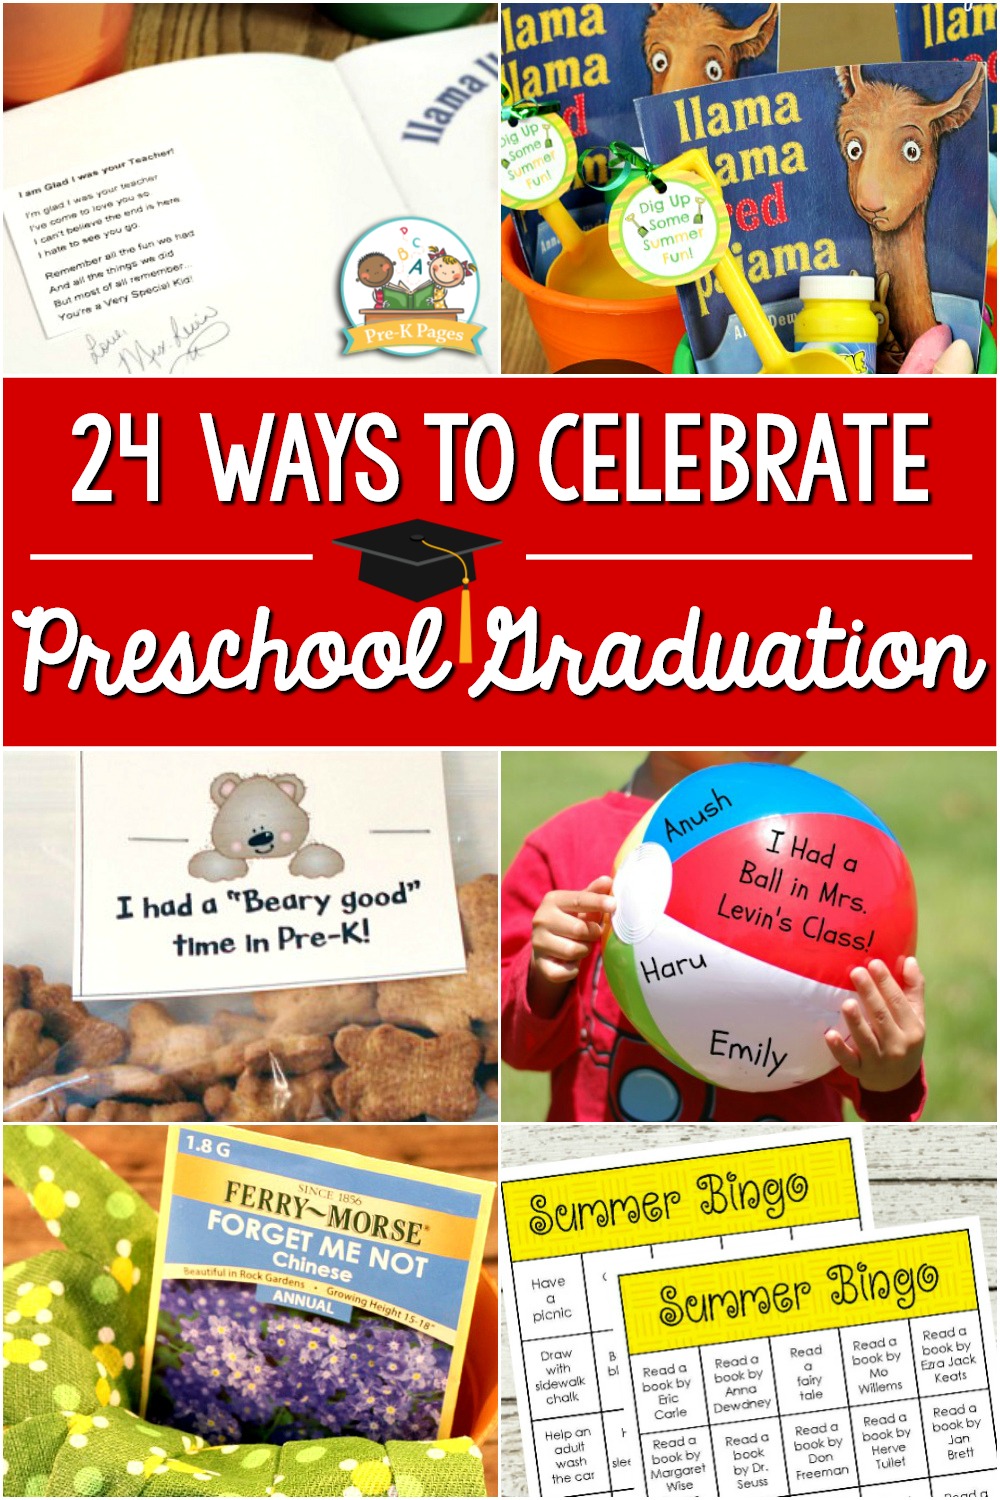 Preschool Graduation Ideas 24 Ways To Celebrate The End Of The Year Pre K Pages